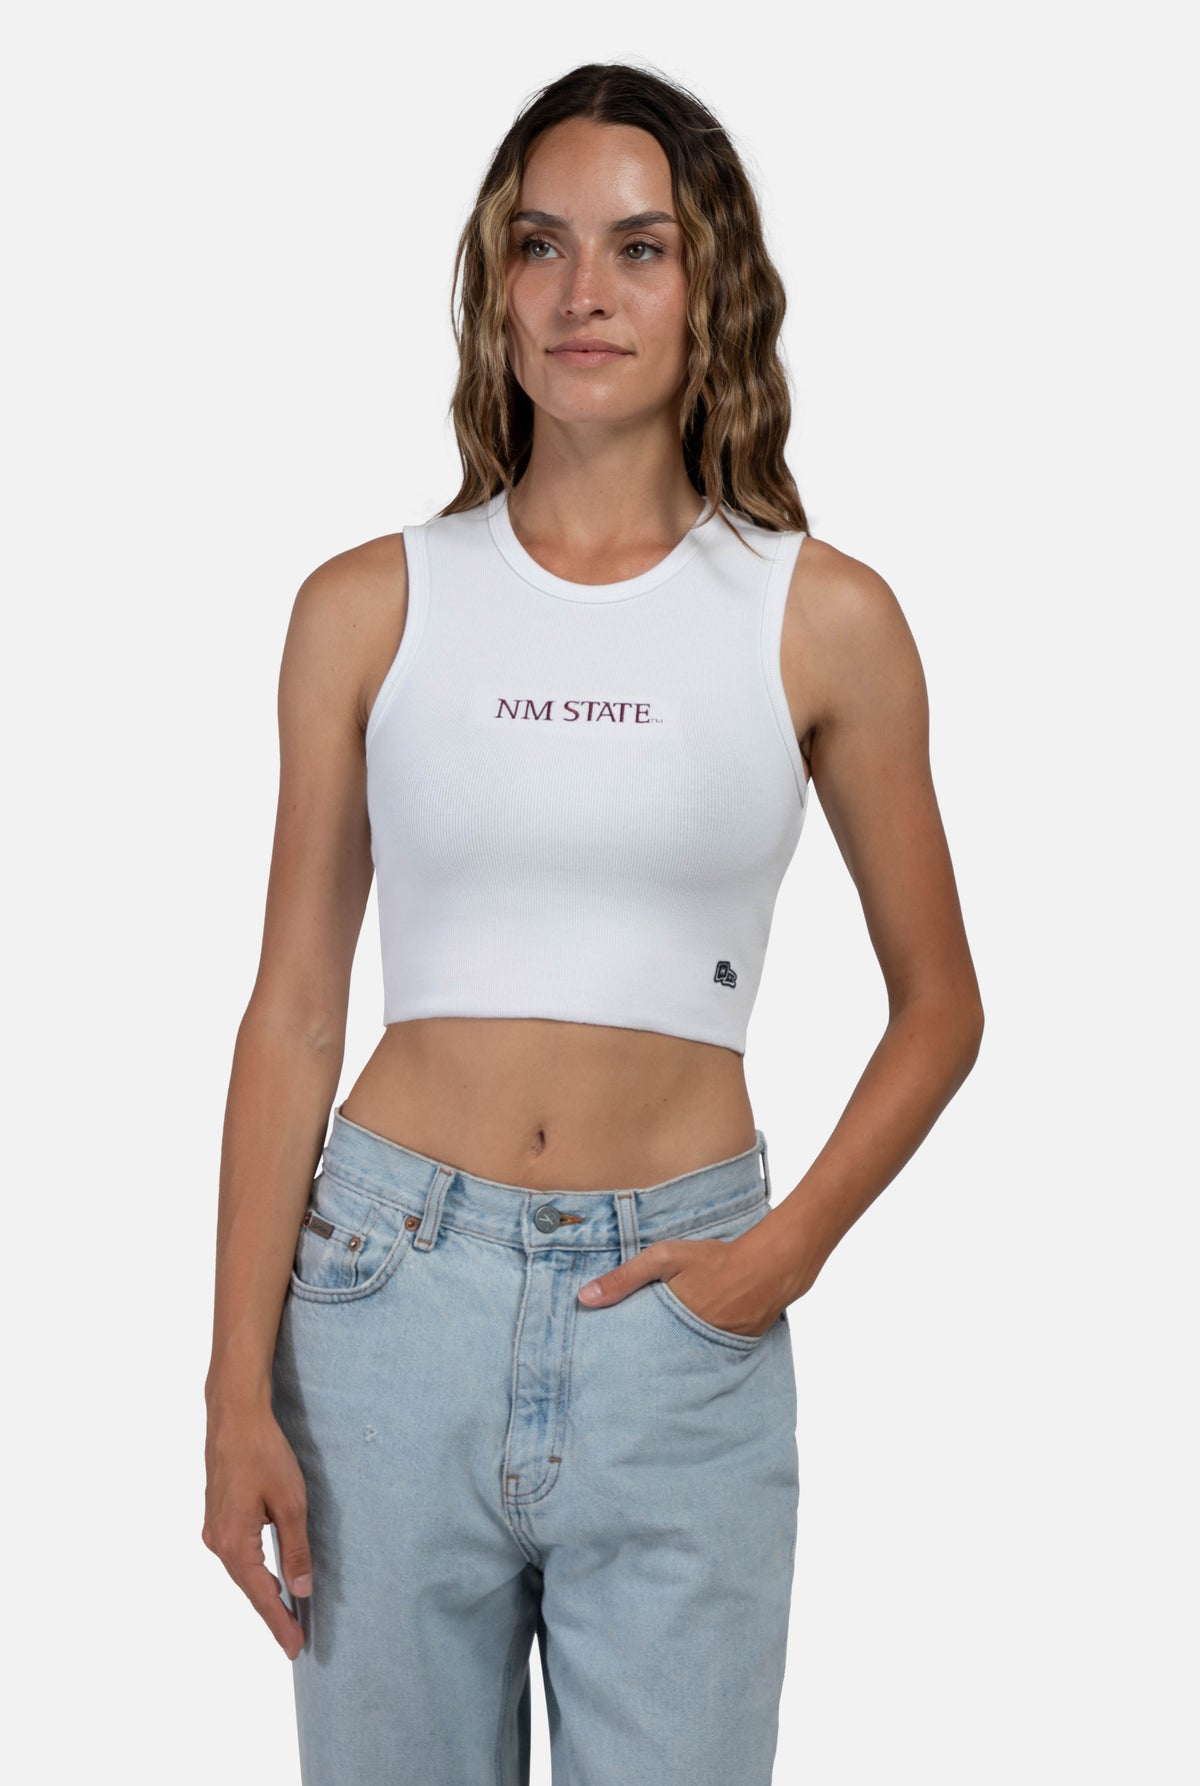 New Mexico State Cut Off Tank